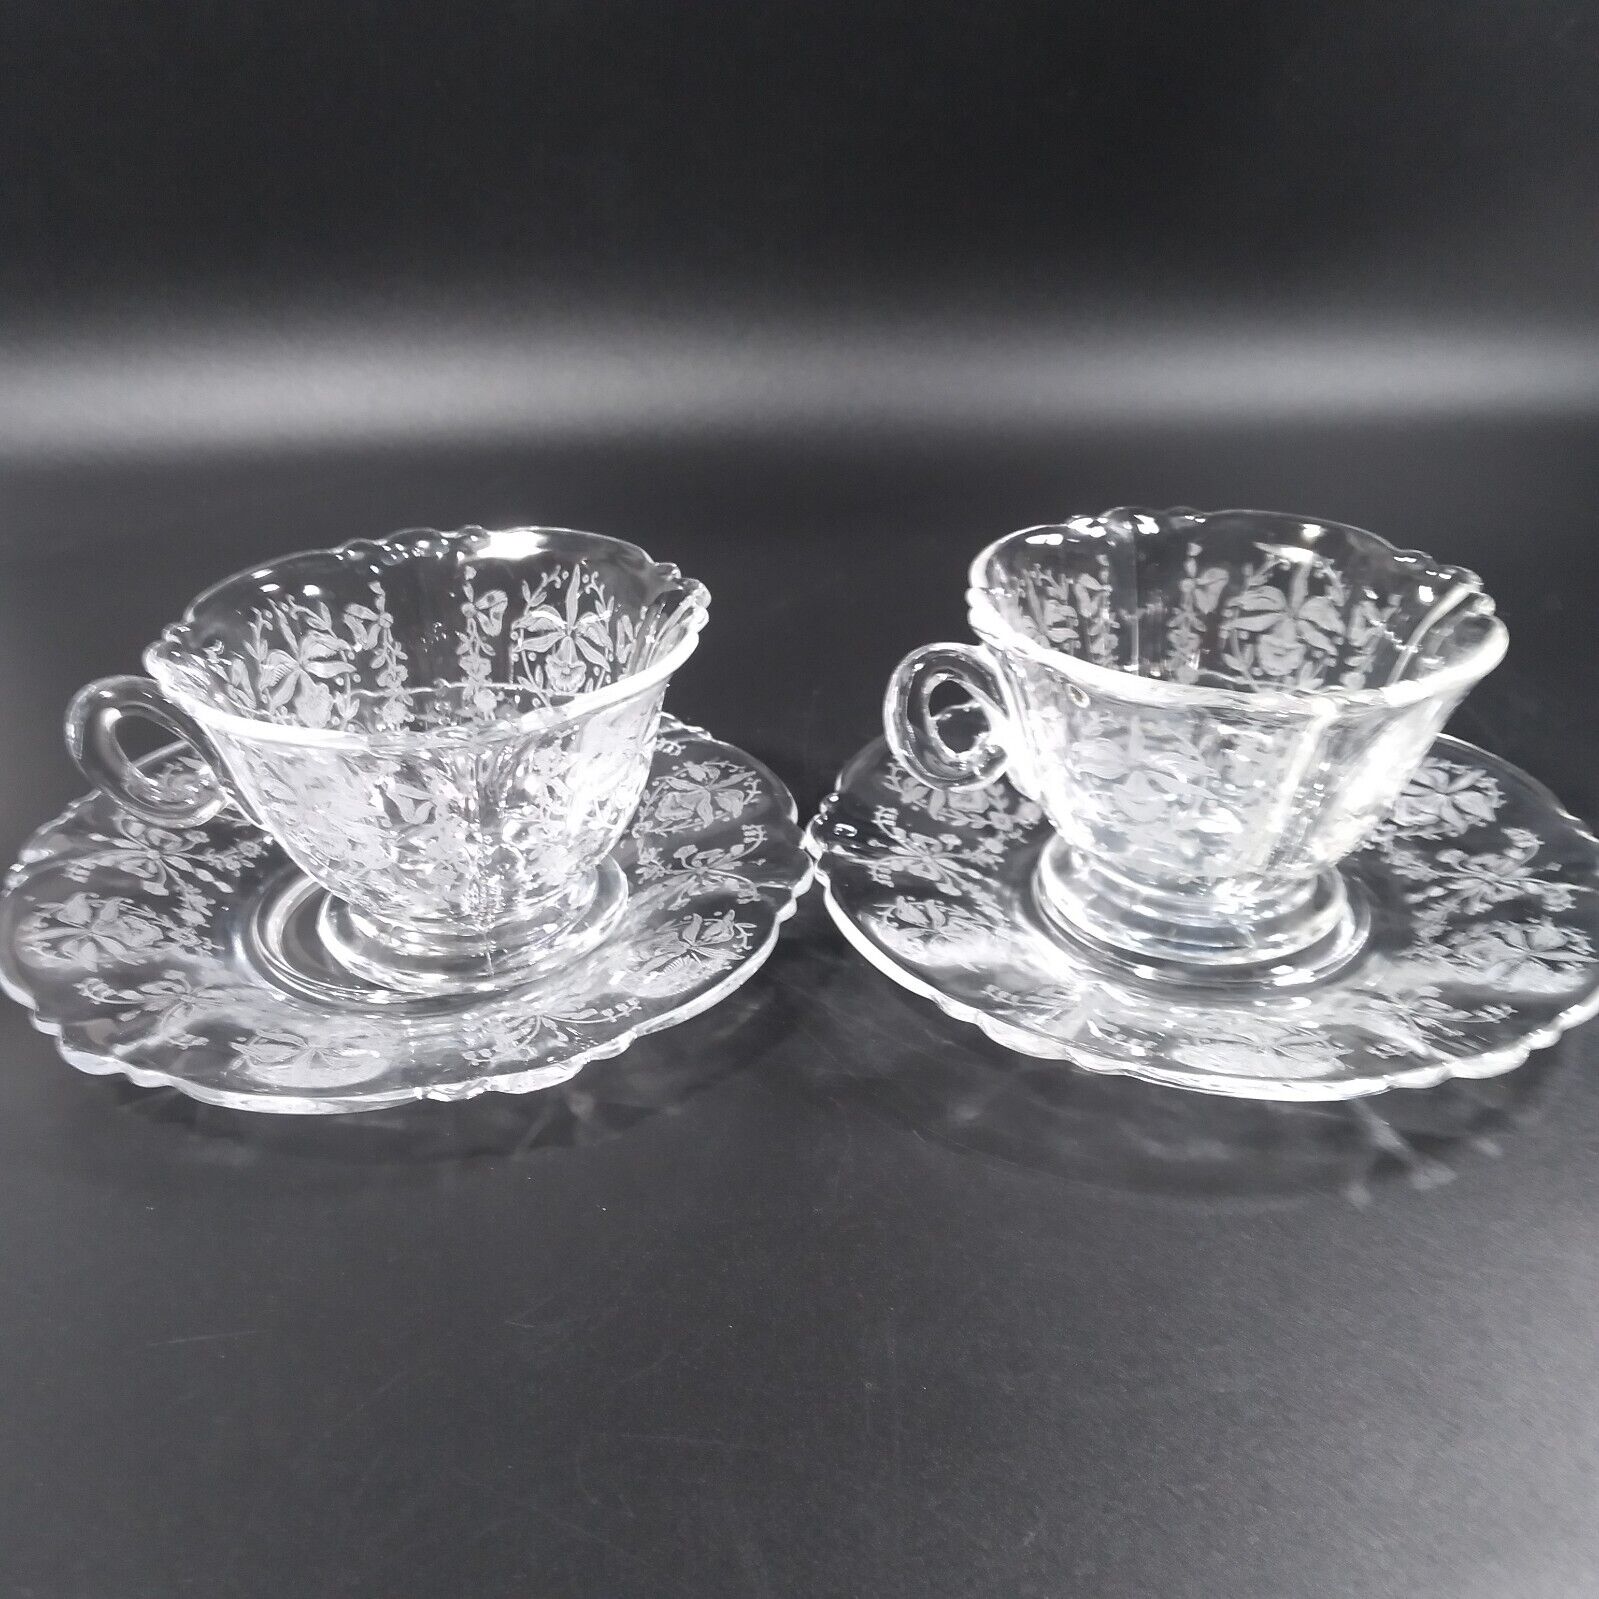 Set of 2 Heisey ORCHID Cup Saucer Set QUEEN ANNE Shape 4 Pieces c. 1940-1957